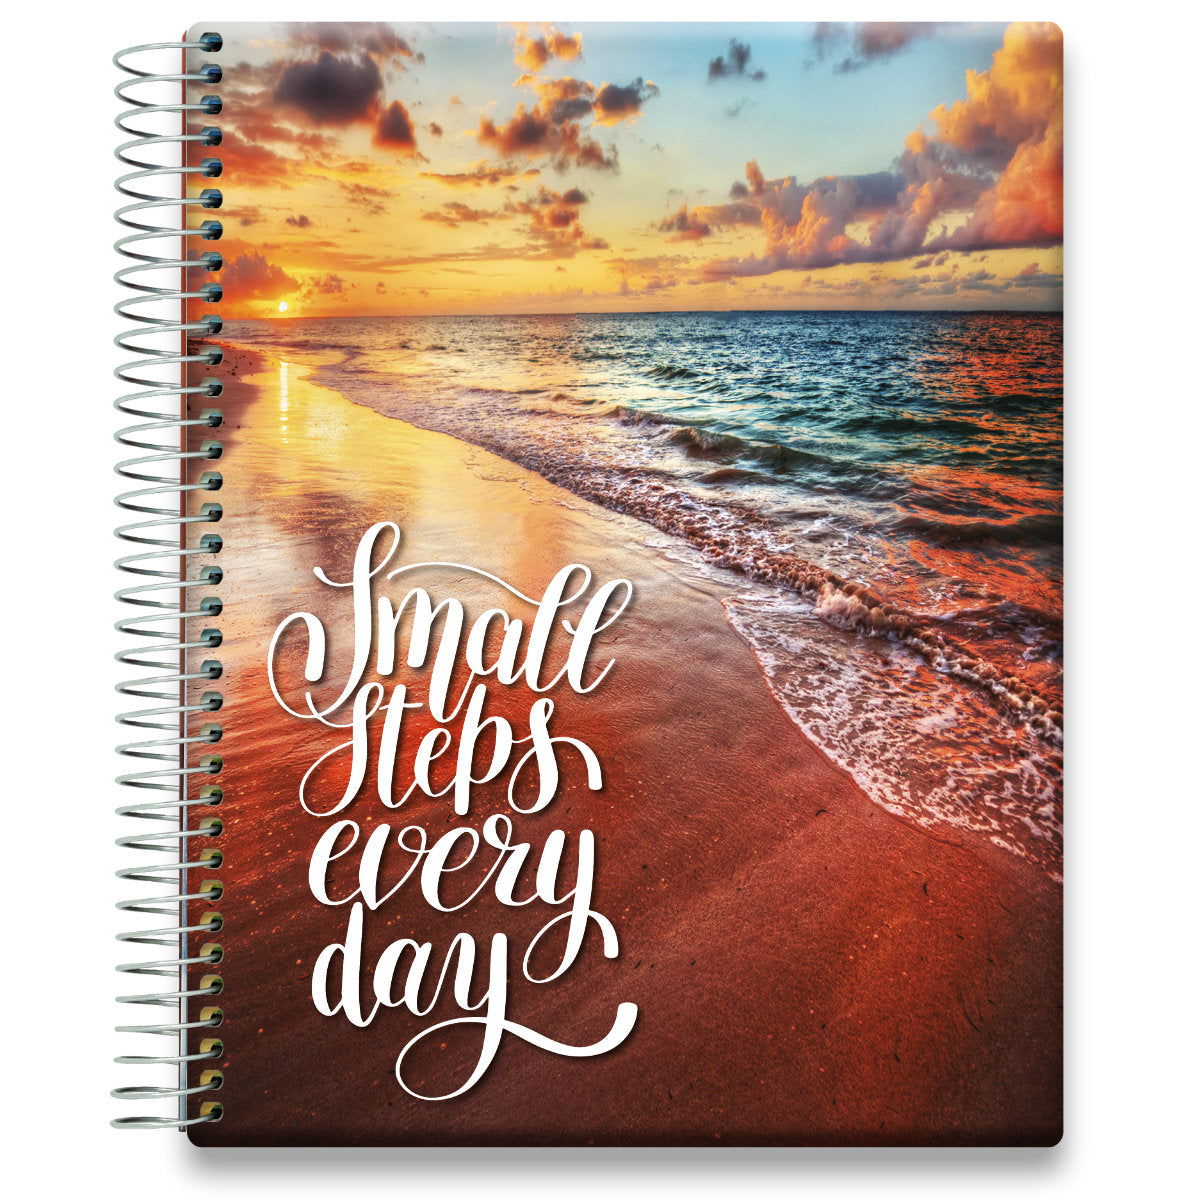 Oct 2024 to Dec 2025 Planner - Small Steps